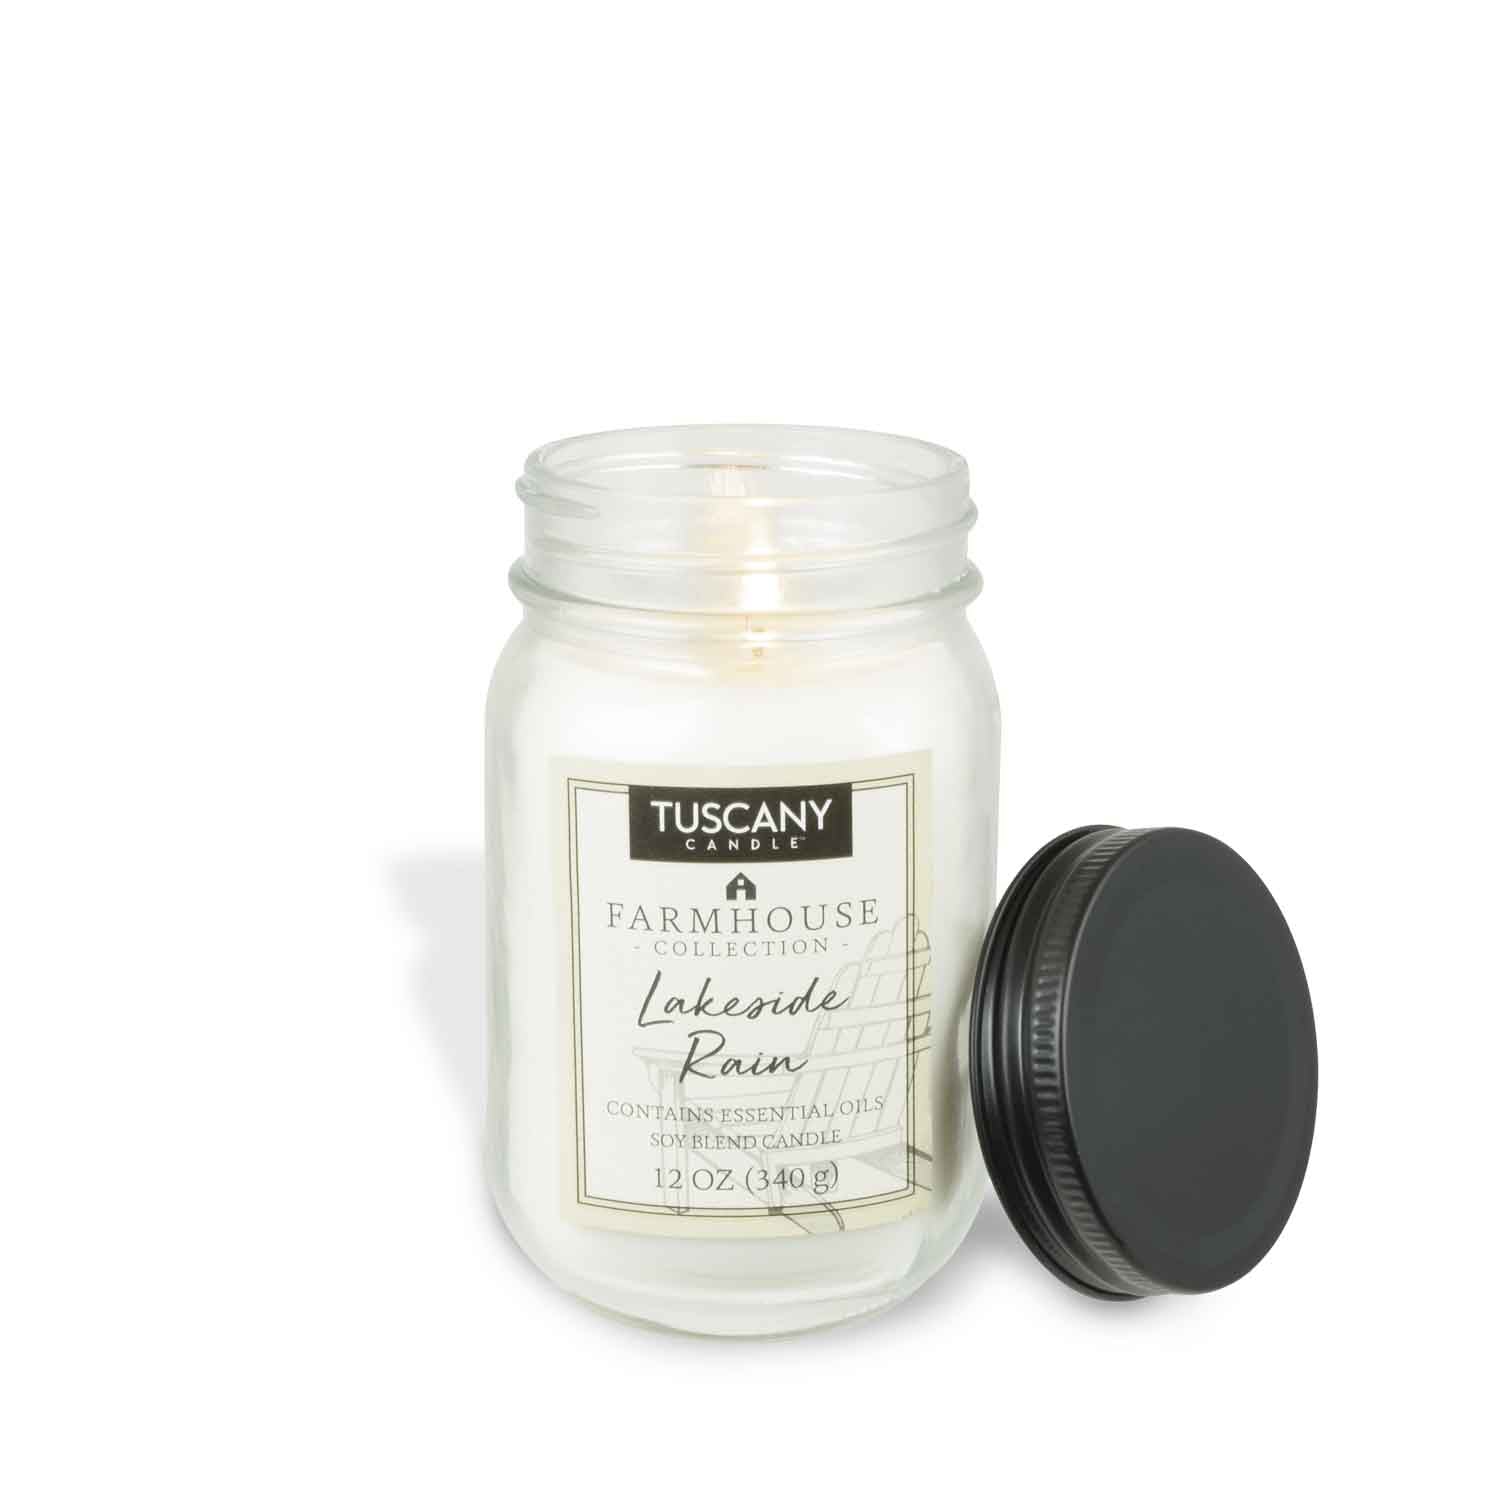 A Lakeside Rain scented candle from the Tuscany Candle® EVD Farmhouse Collection, encased in a white jar.